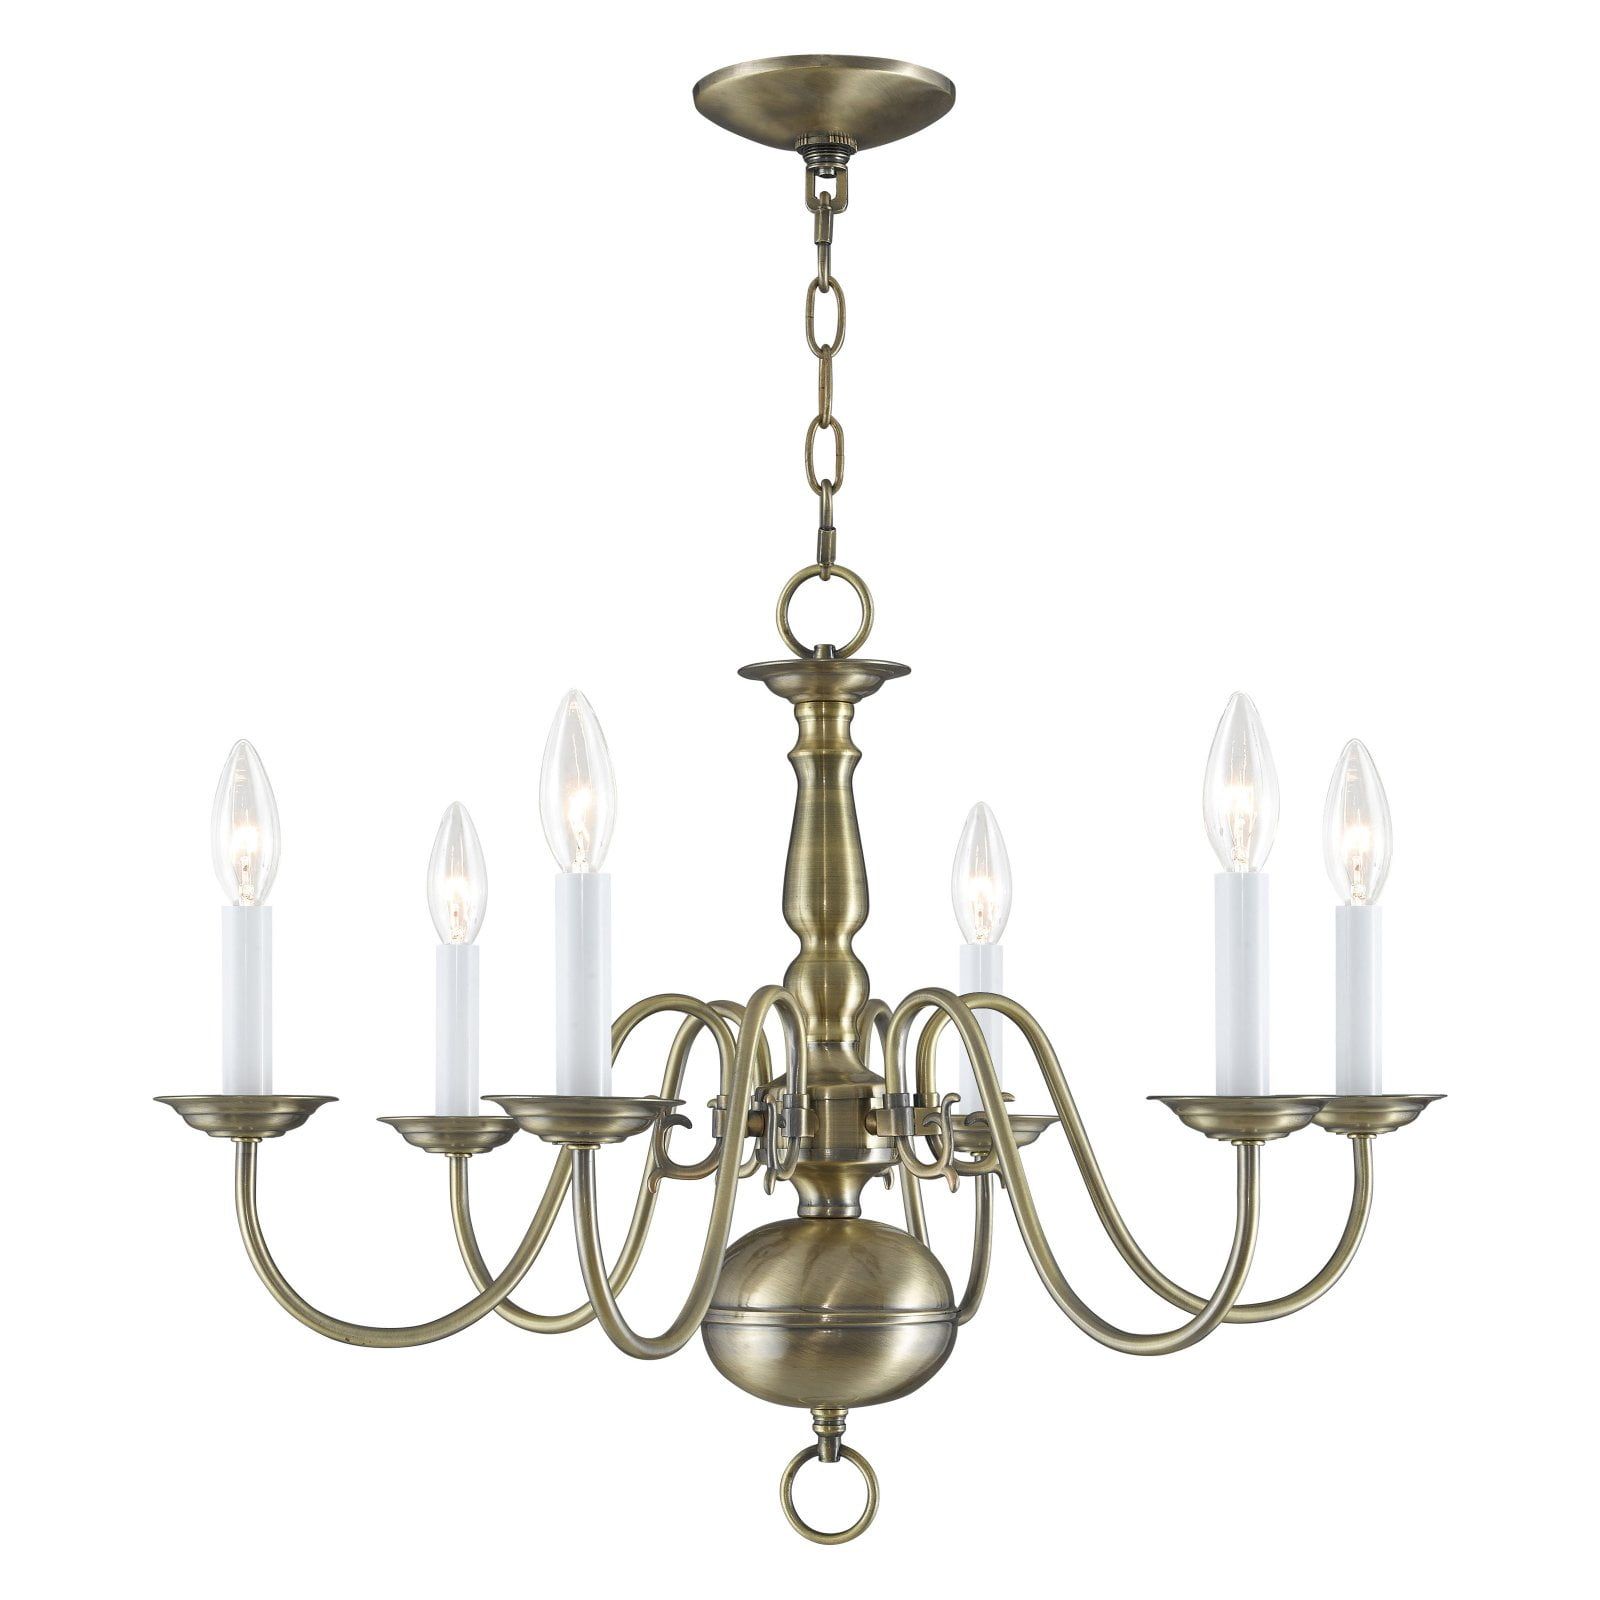 Antique Brass 6-Light Traditional Chandelier with Steel Frame